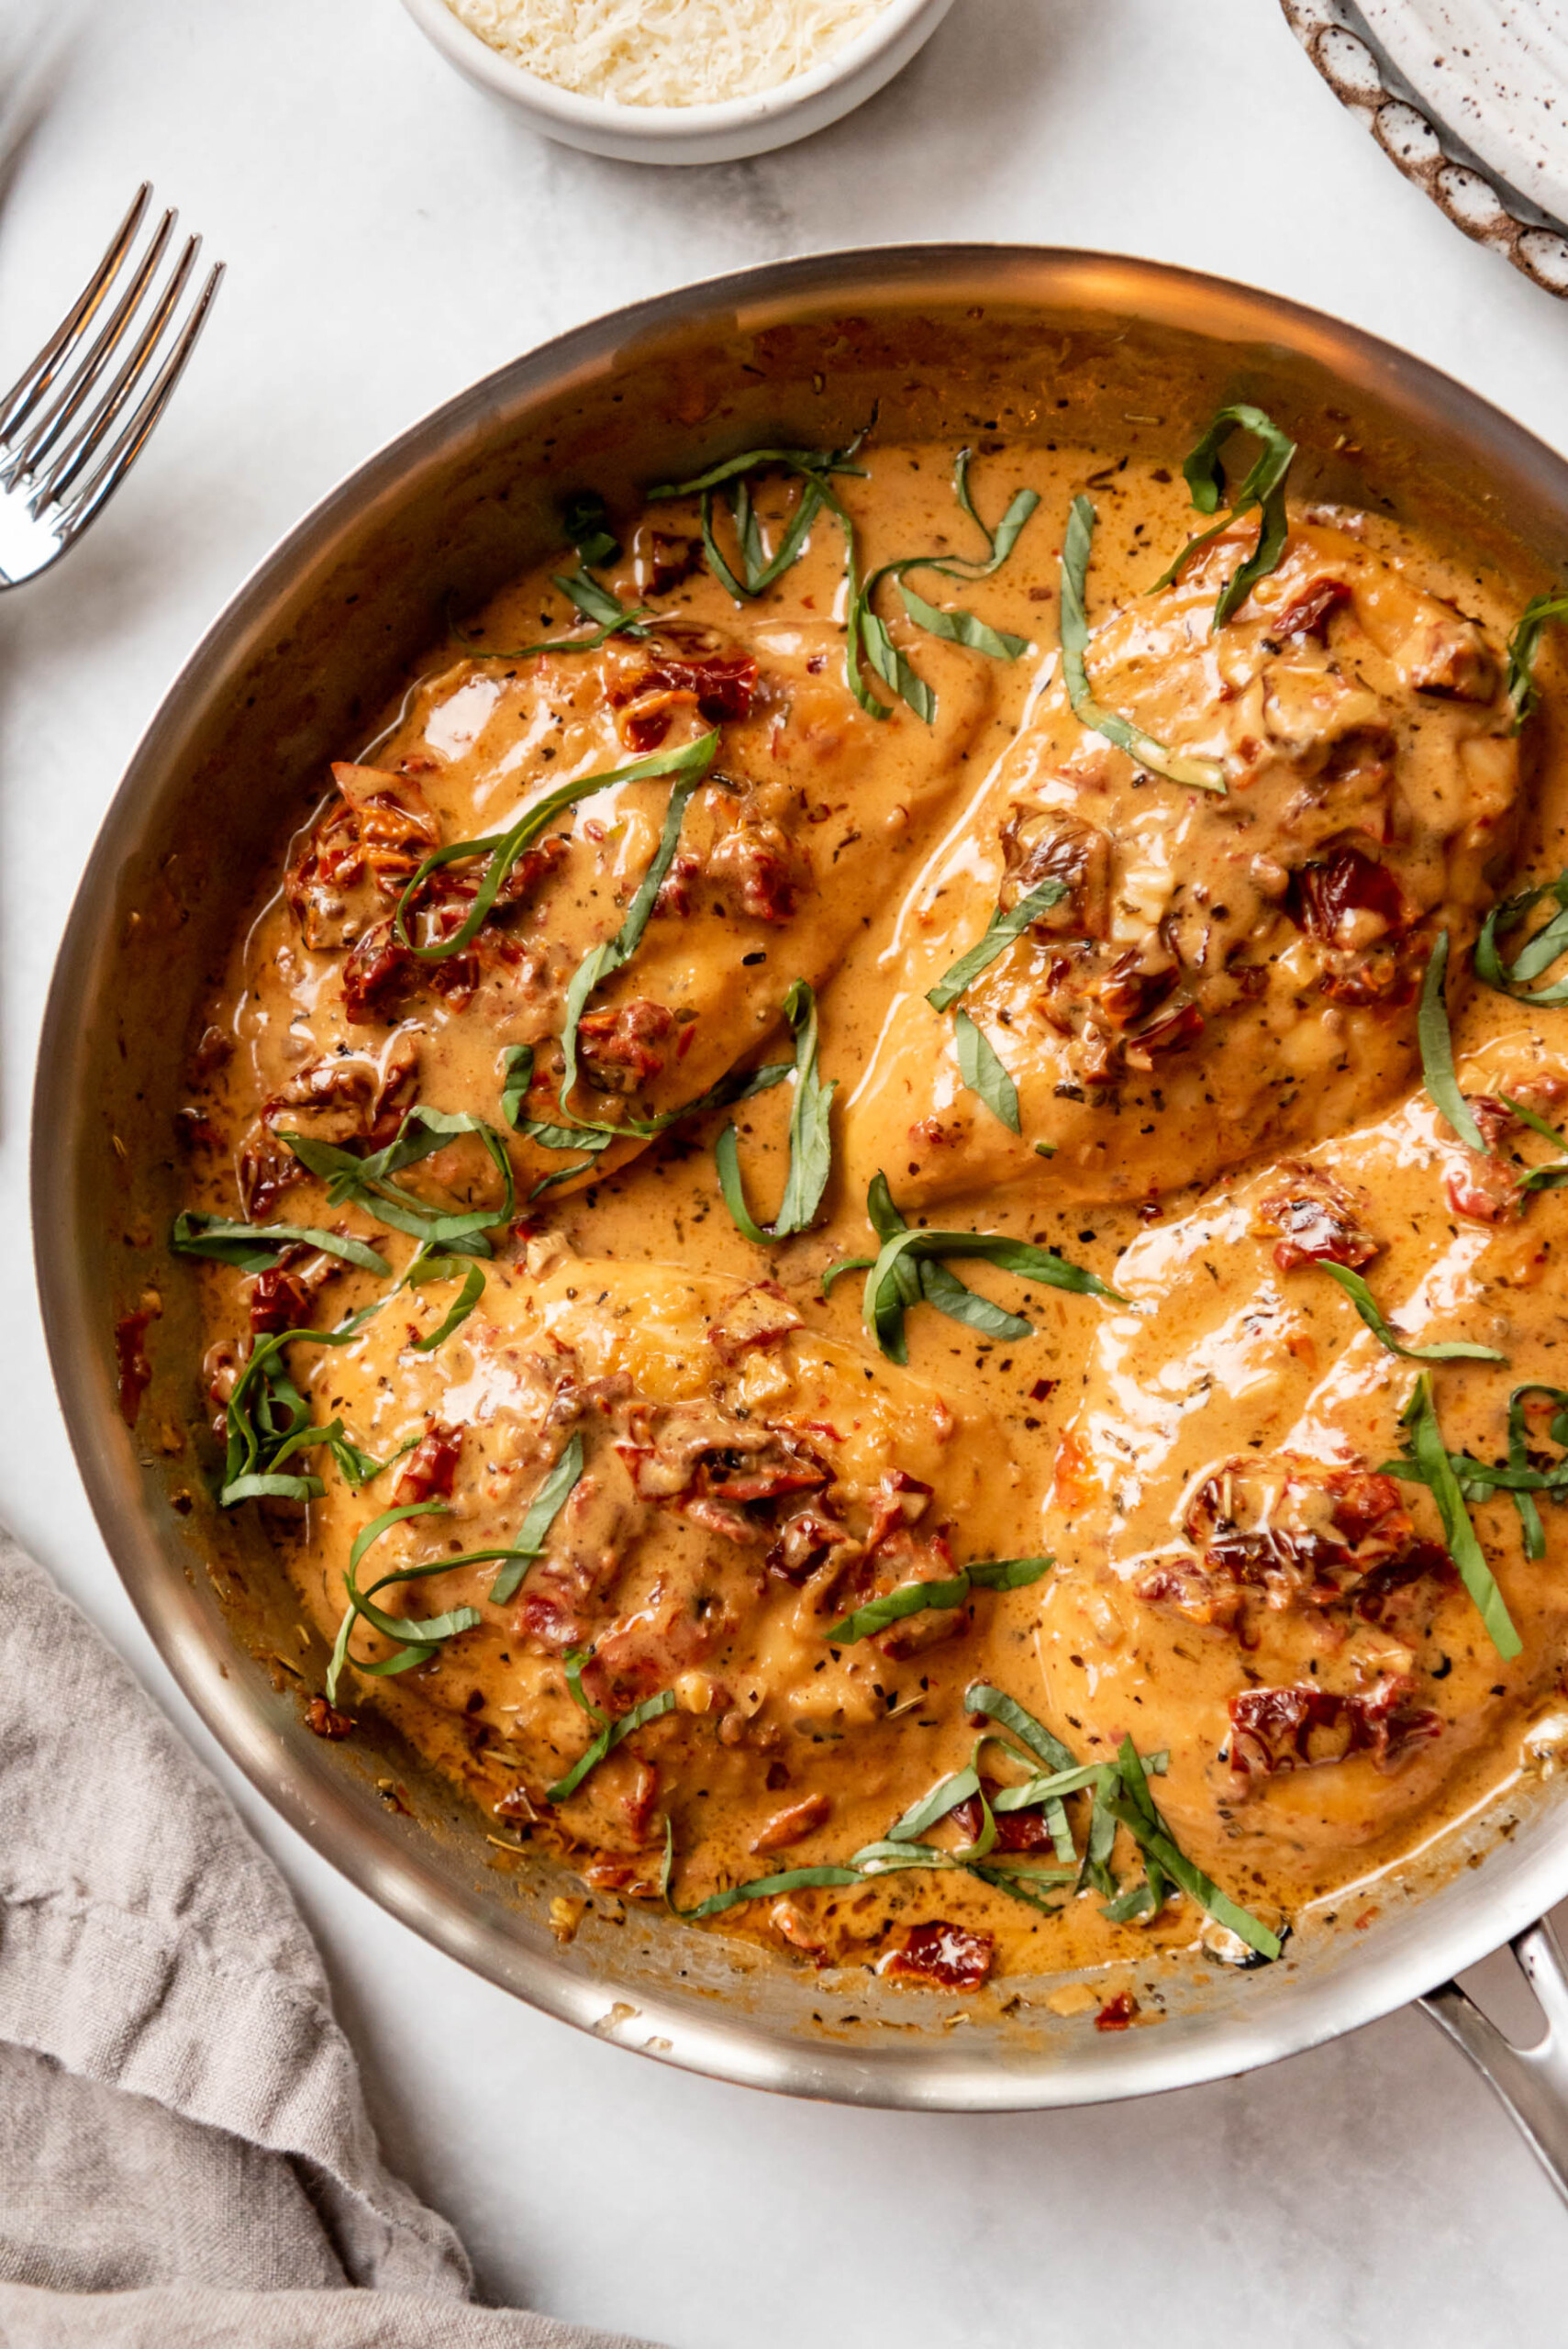 Seared chicken breasts in a creamy tuscan sauce made with sundried tomatoes and basil.